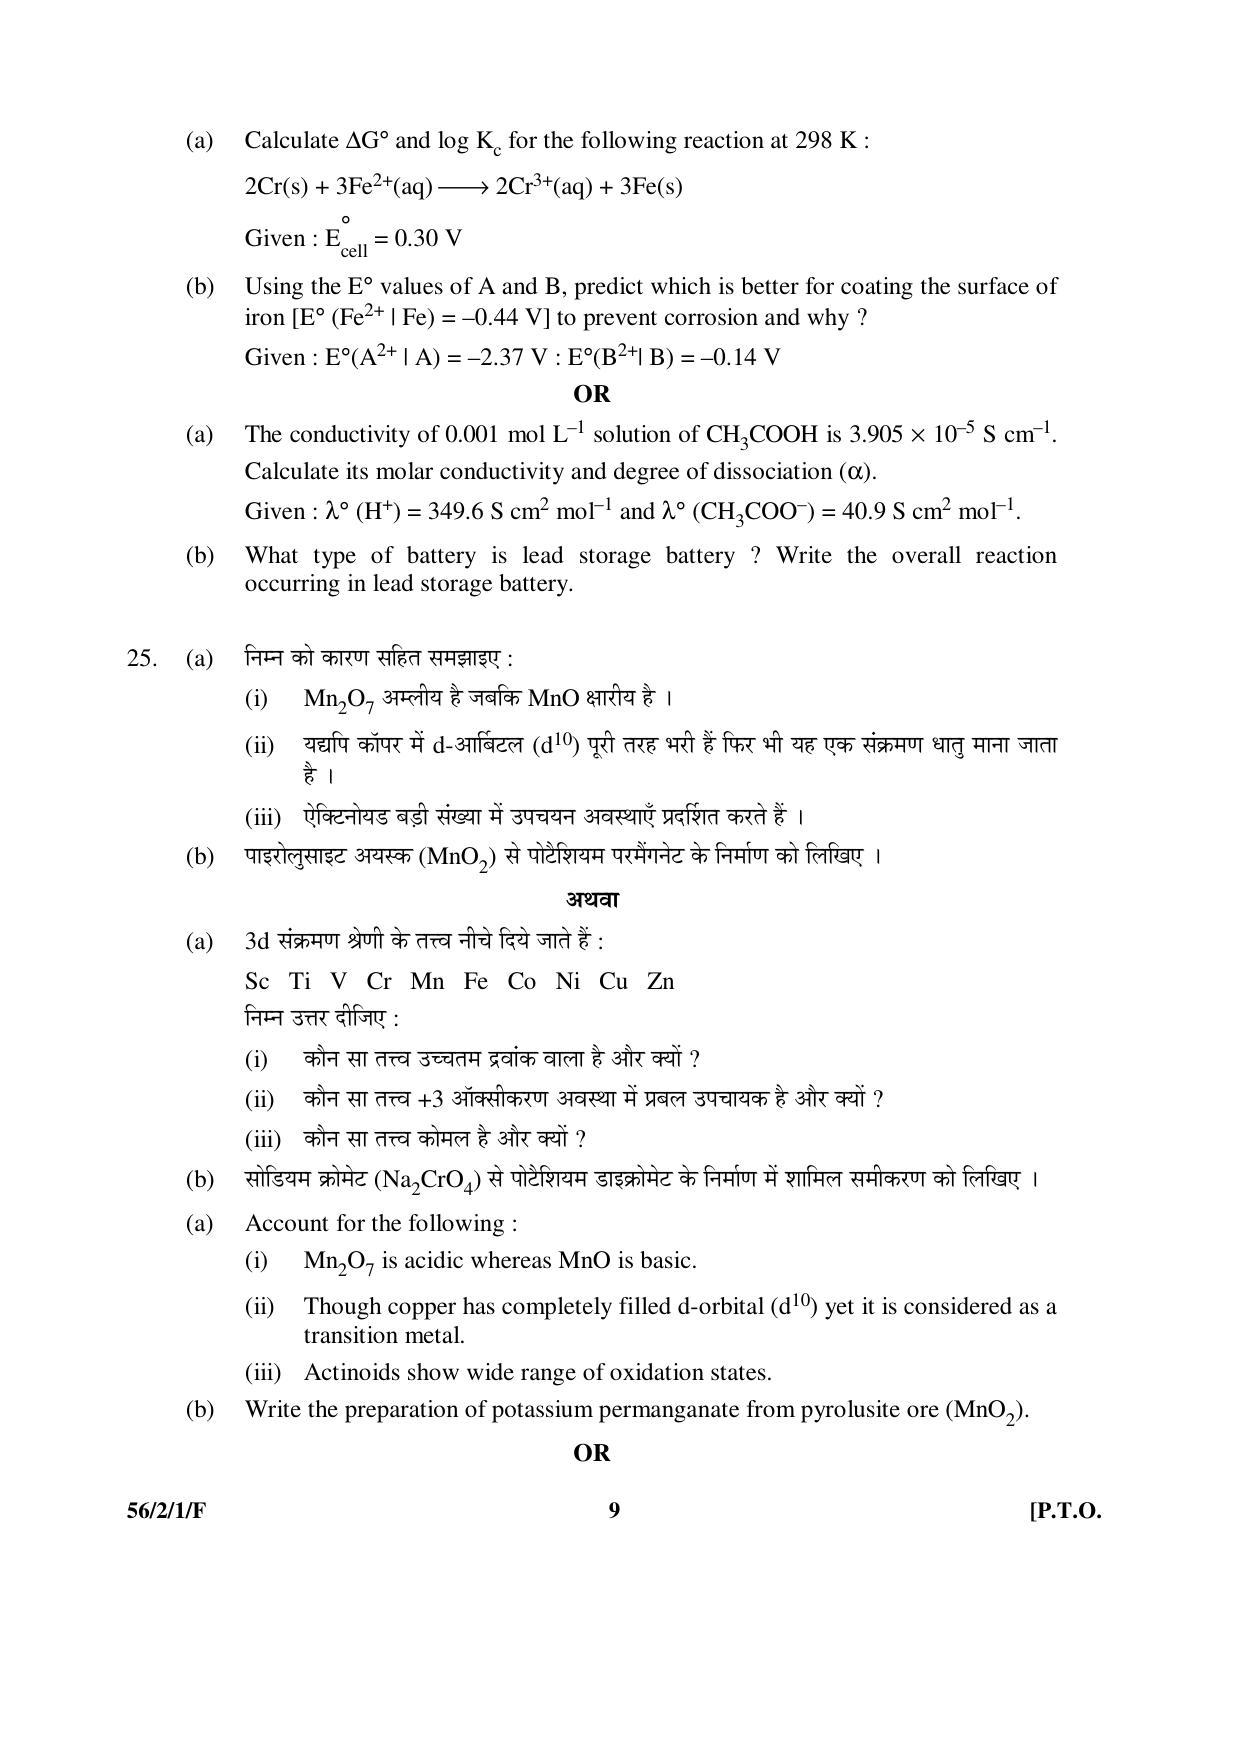 CBSE Class 12 56-2-1-F _Chemistry_ 2016 Question Paper - Page 9